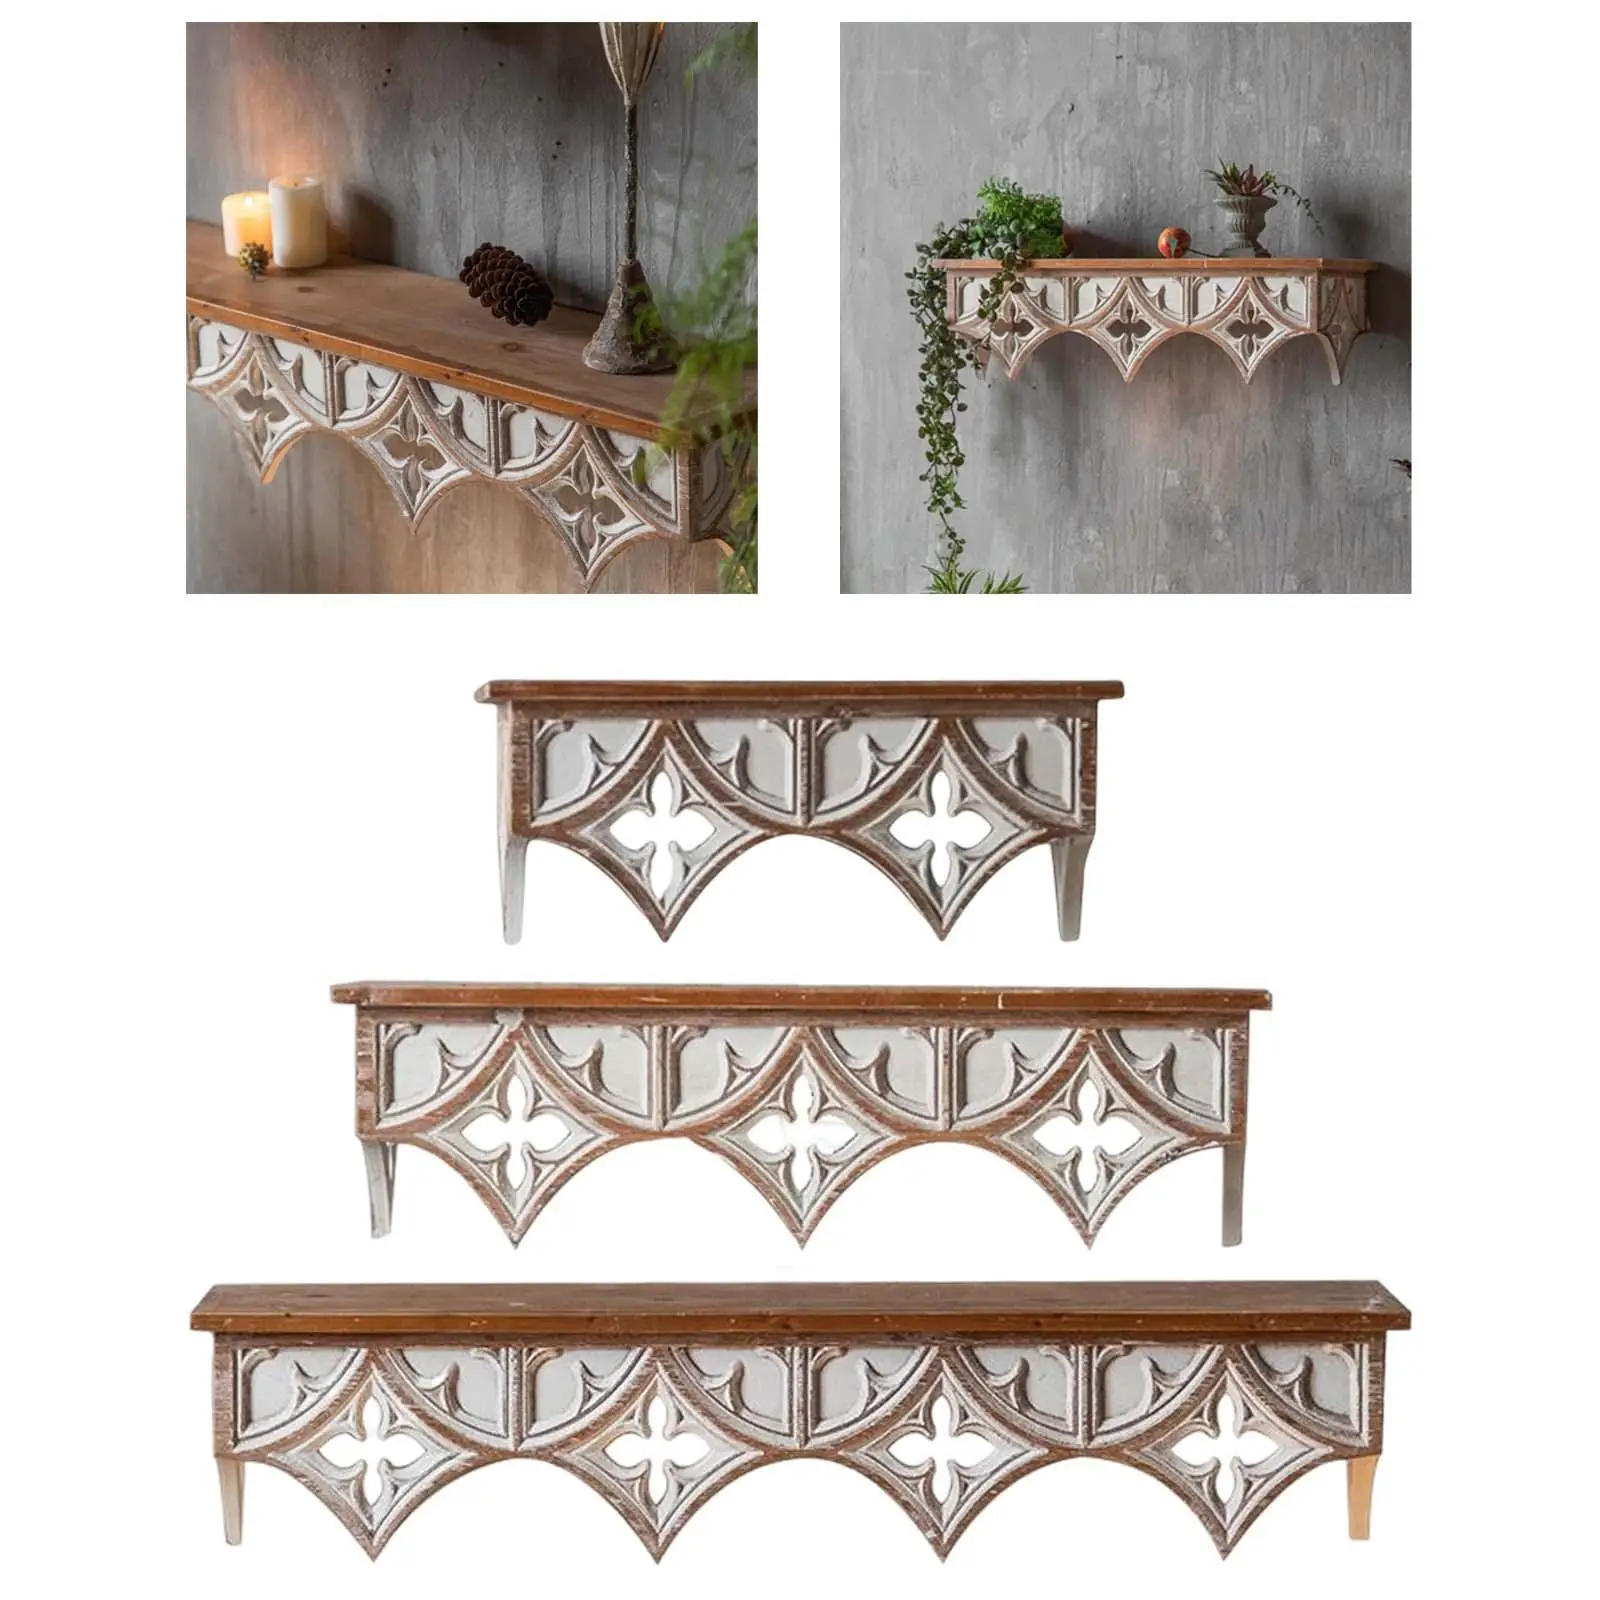 Wall Shelf Storage Rack Wall Mounted Vintage Style Display Holder Crafts Rustic for Bedroom Living Room Bathroom Decor Ornament